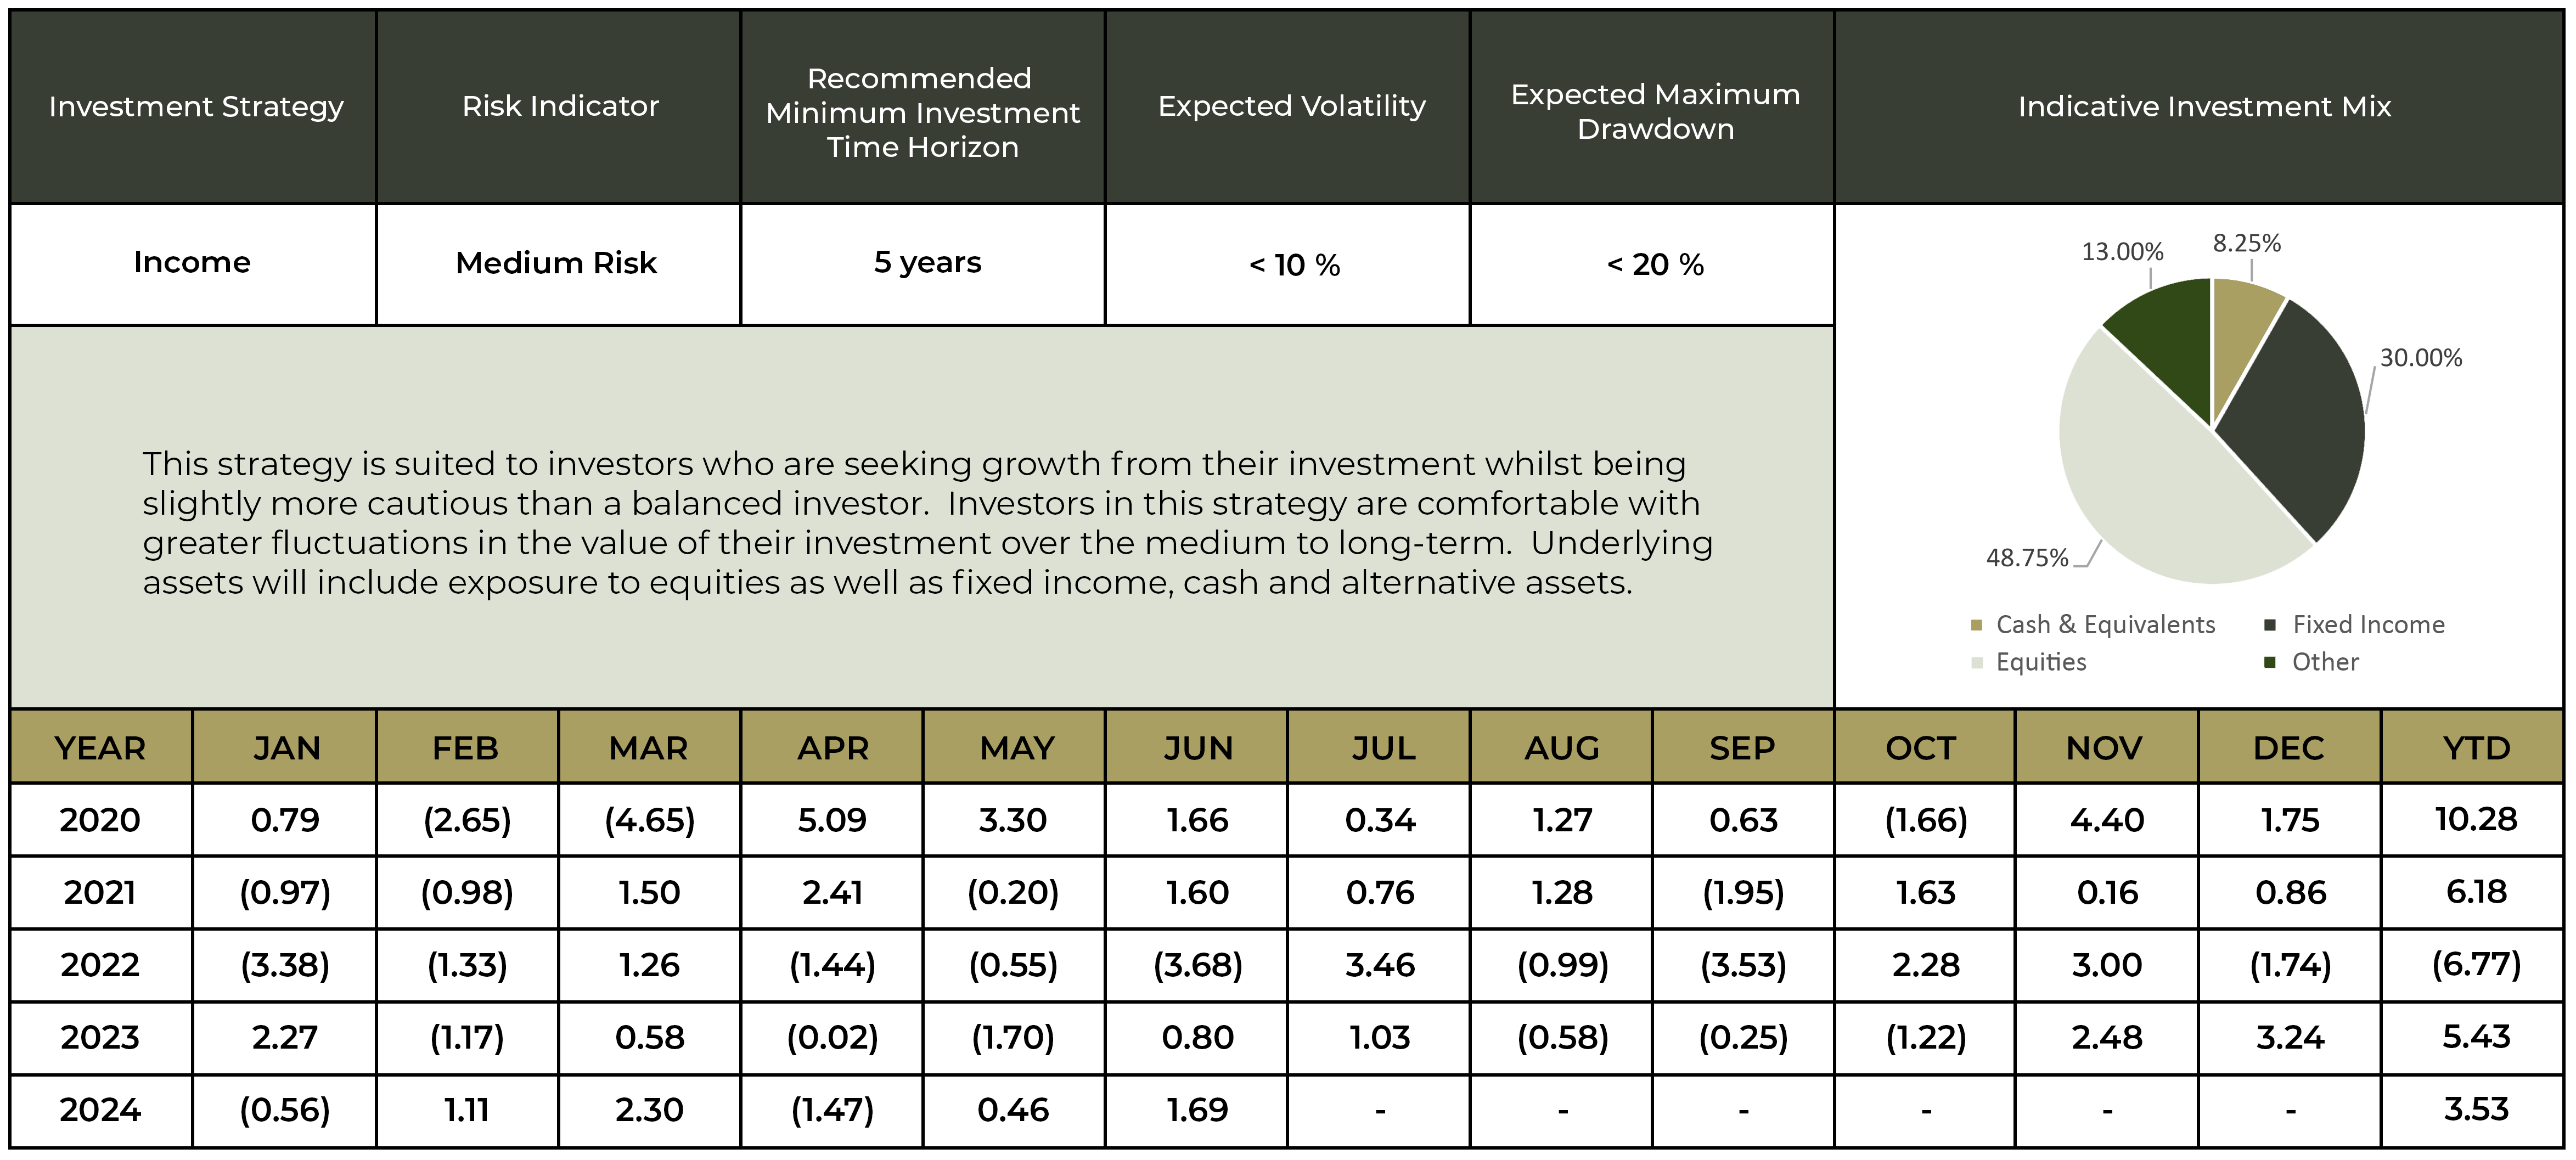 Investment Performance Figures for the Income Strategy